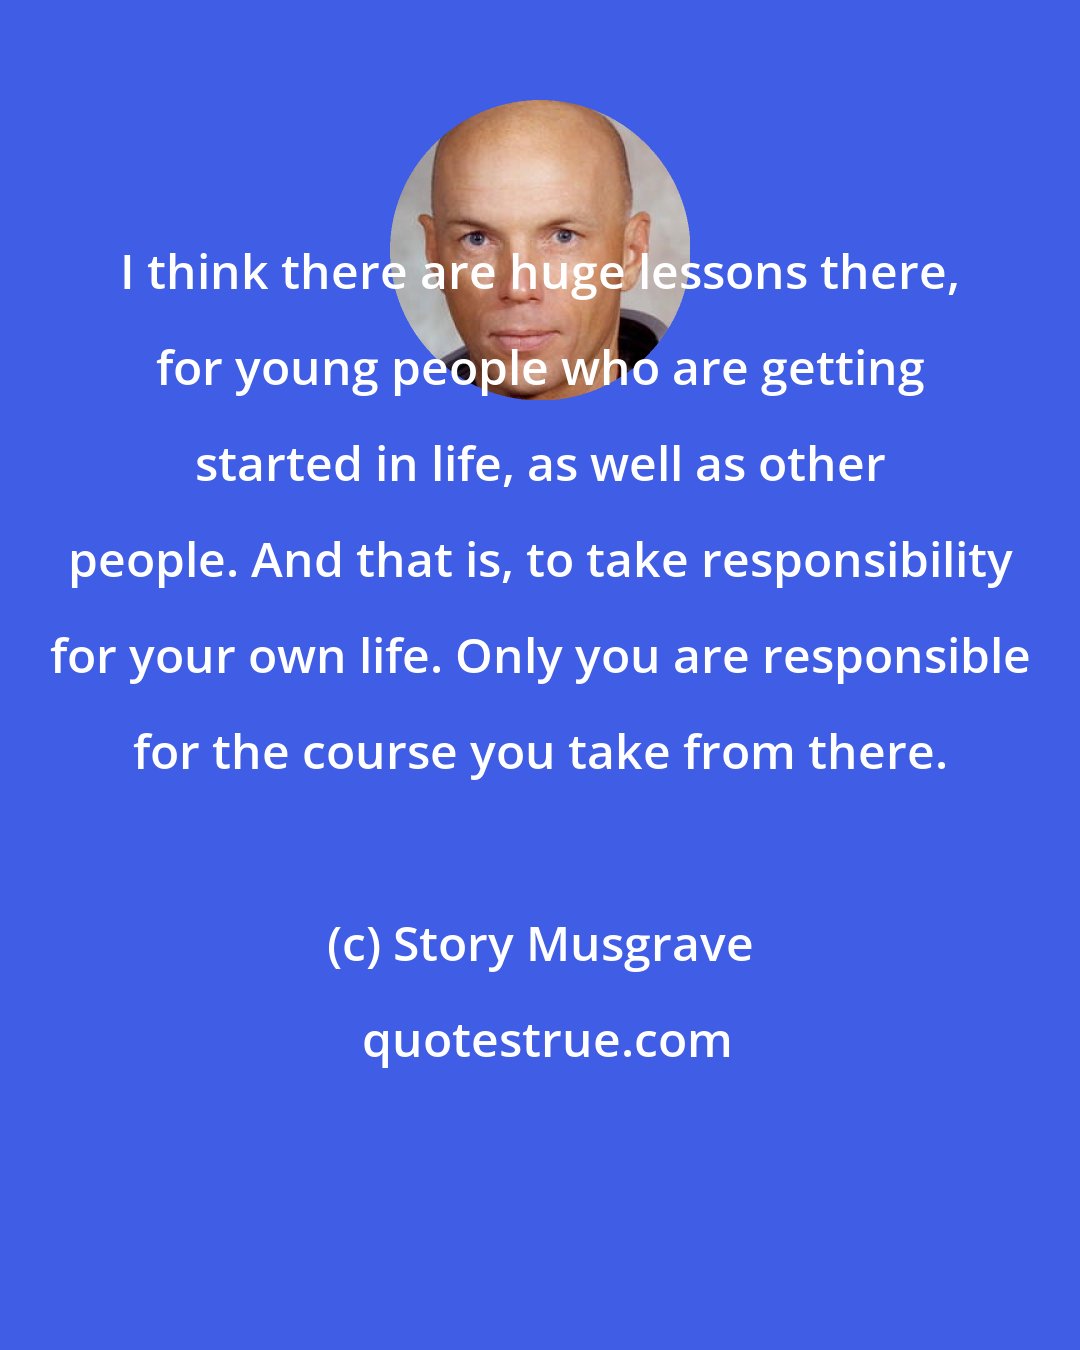 Story Musgrave: I think there are huge lessons there, for young people who are getting started in life, as well as other people. And that is, to take responsibility for your own life. Only you are responsible for the course you take from there.